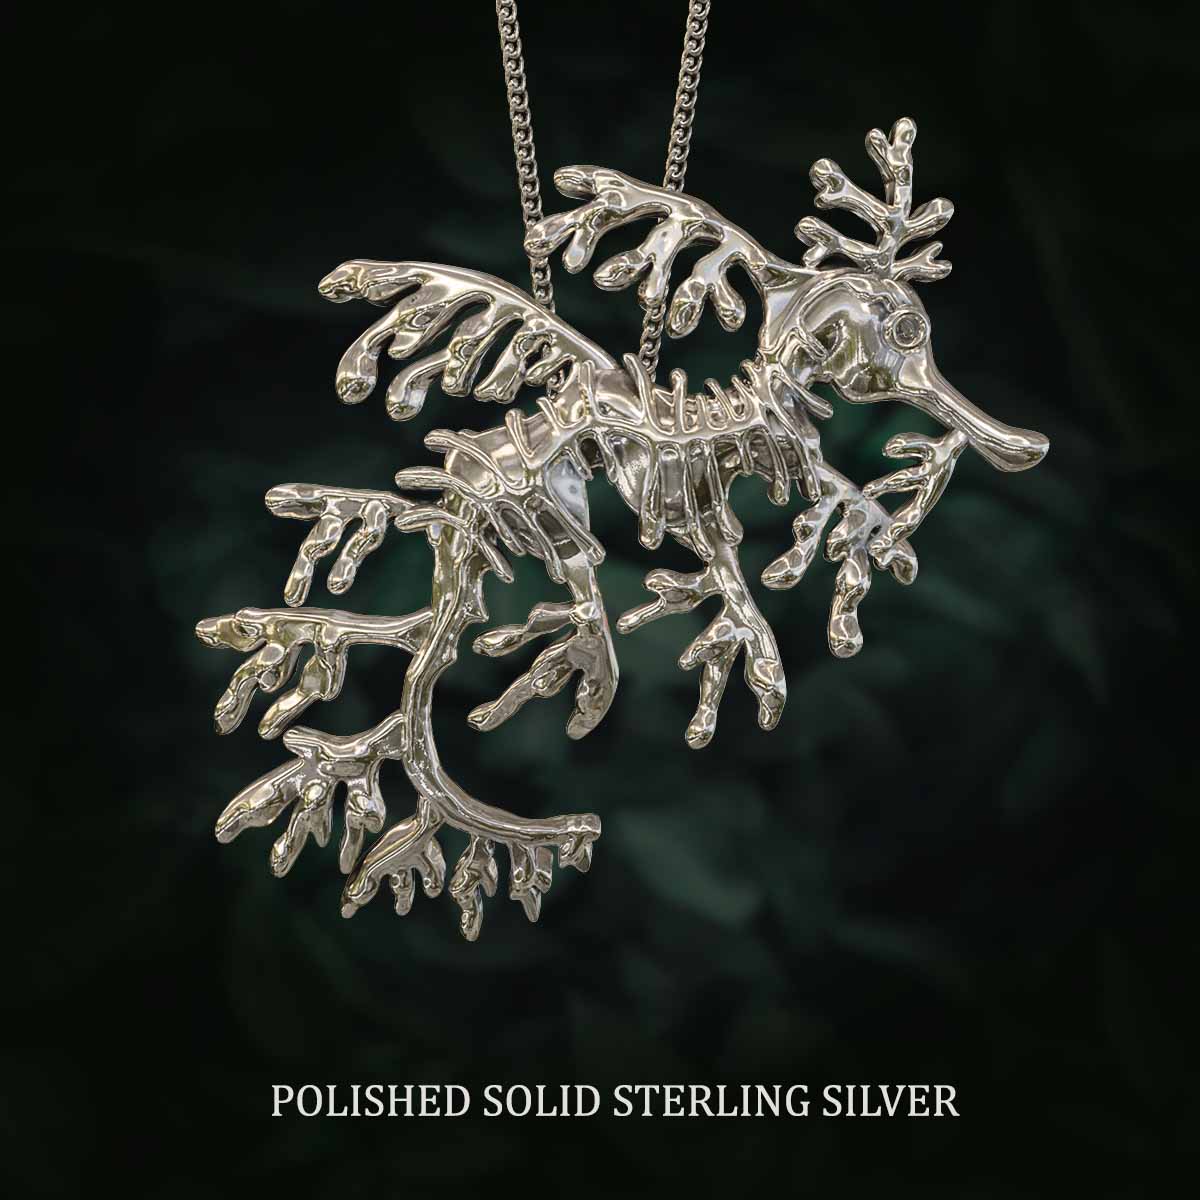 Polished-Solid-Sterling-Silver-Leafy-Sea-Dragon-Pendant-Jewelry-For-Necklace